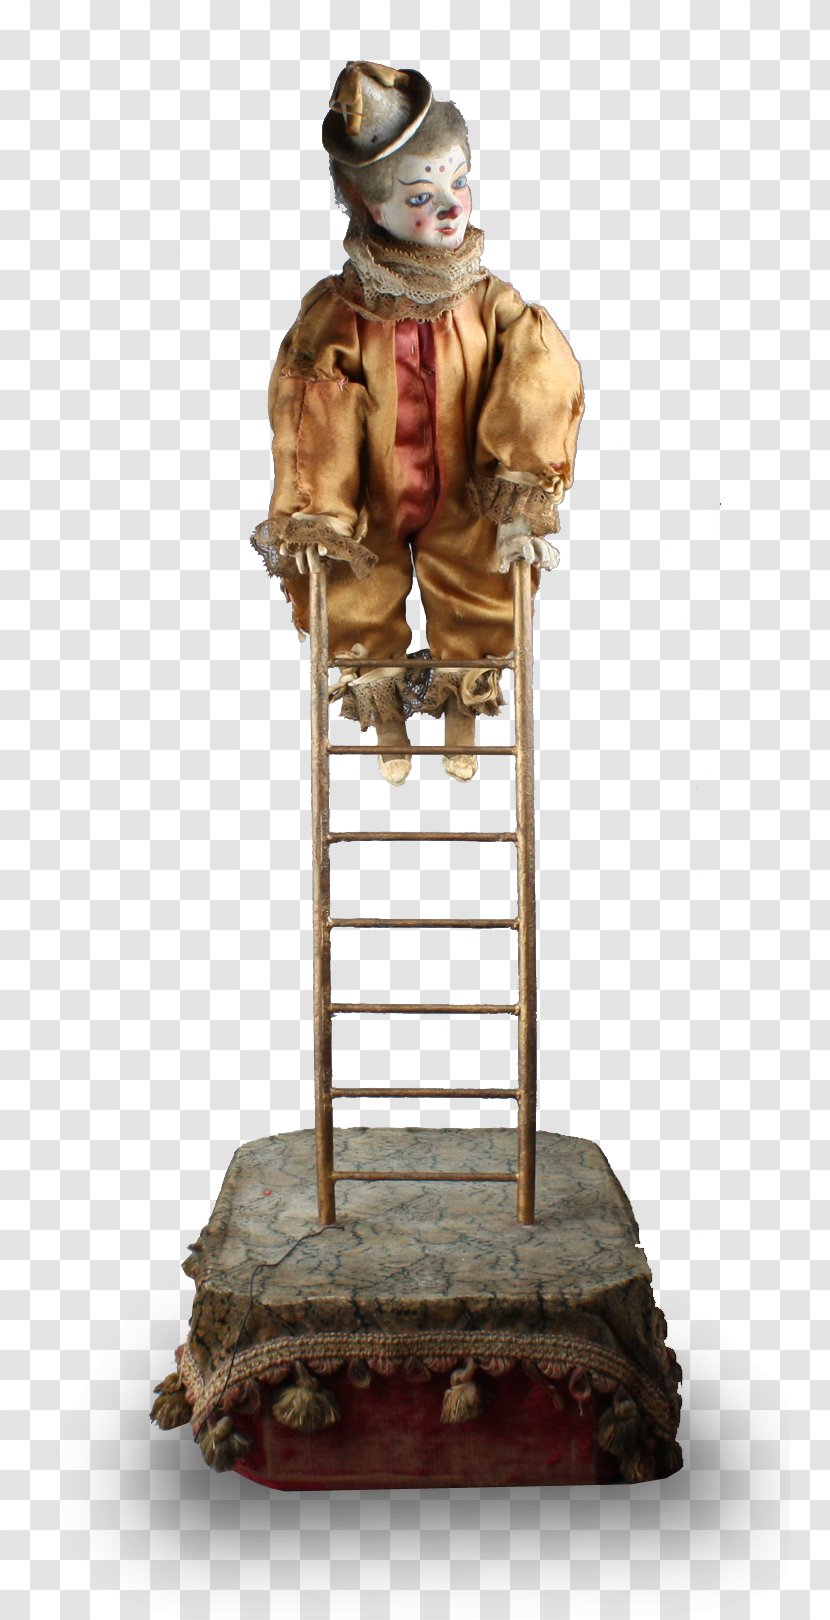 Roullet & Decamps Automaton Figurine Clown Musical Theatre - French People - Hagenbeckwallace Circus Transparent PNG